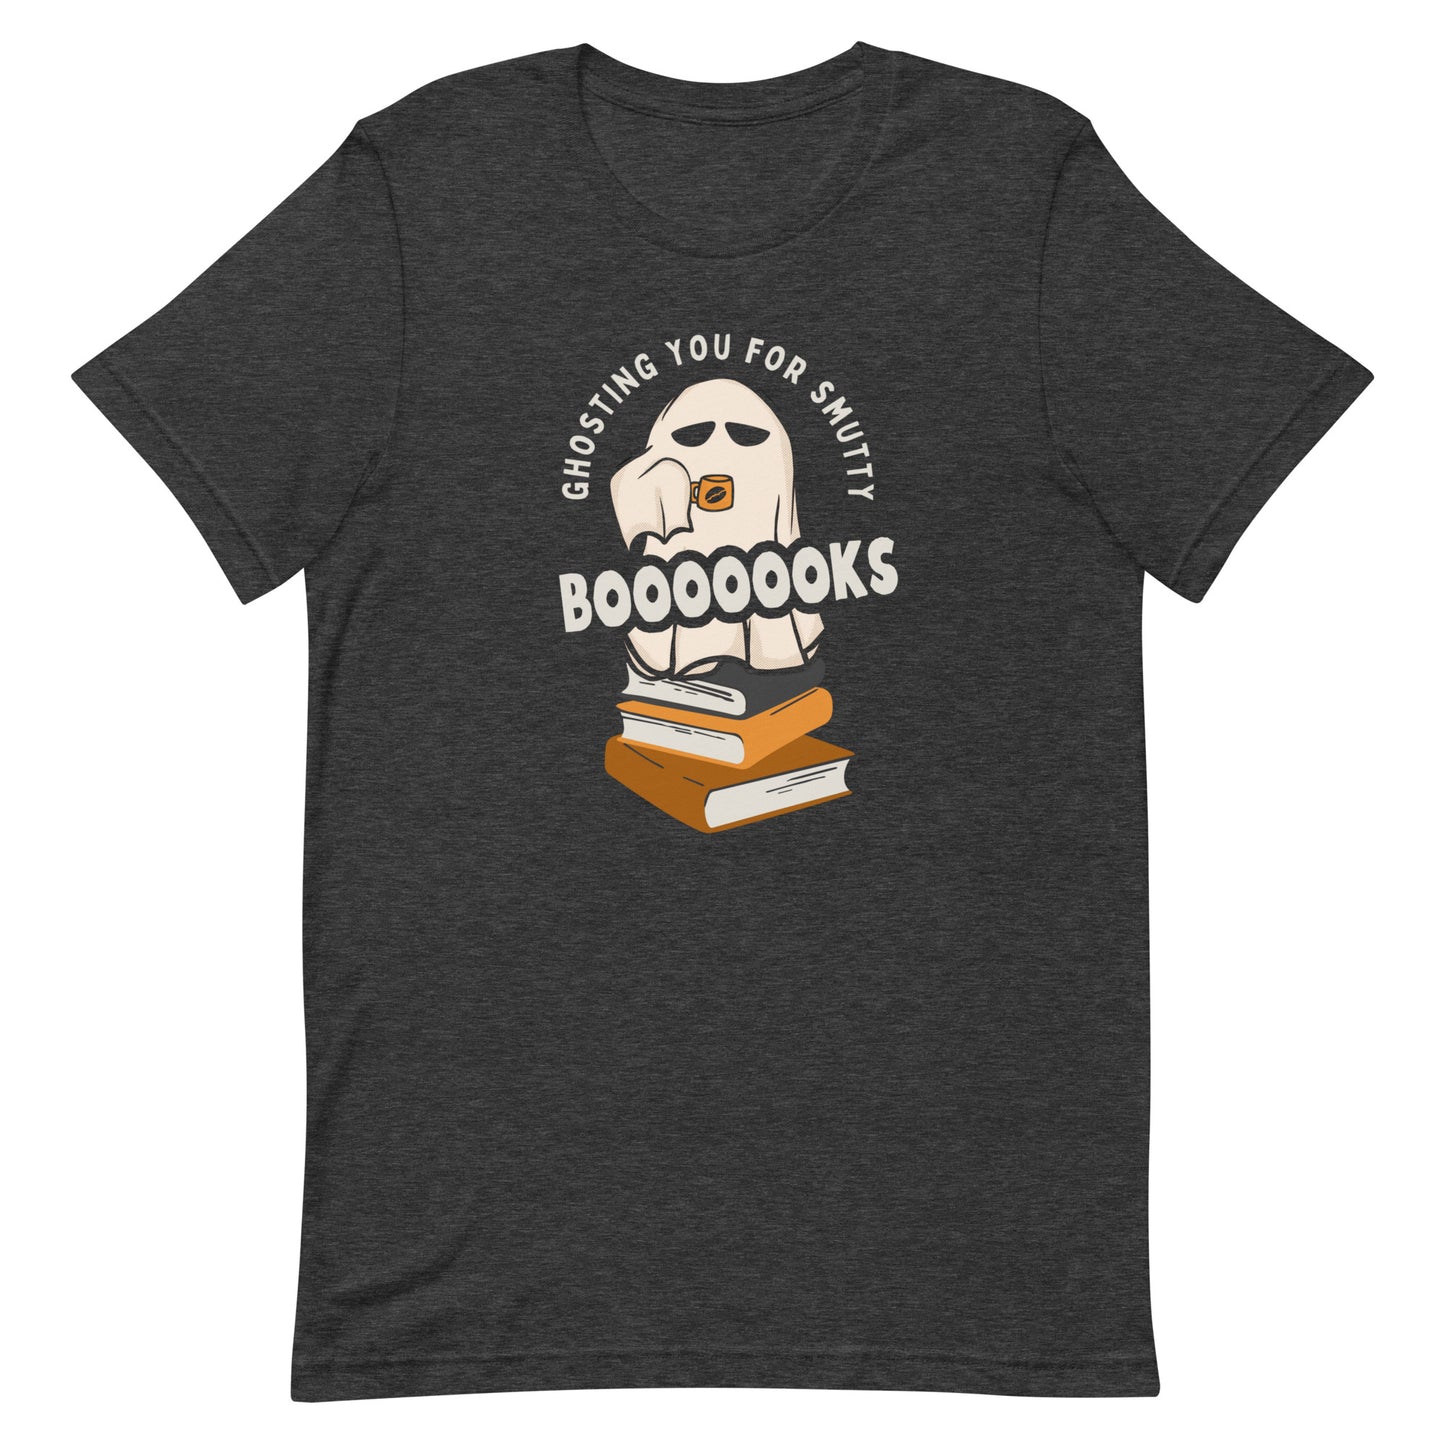 ghosting you for smutty booooks t-shirt